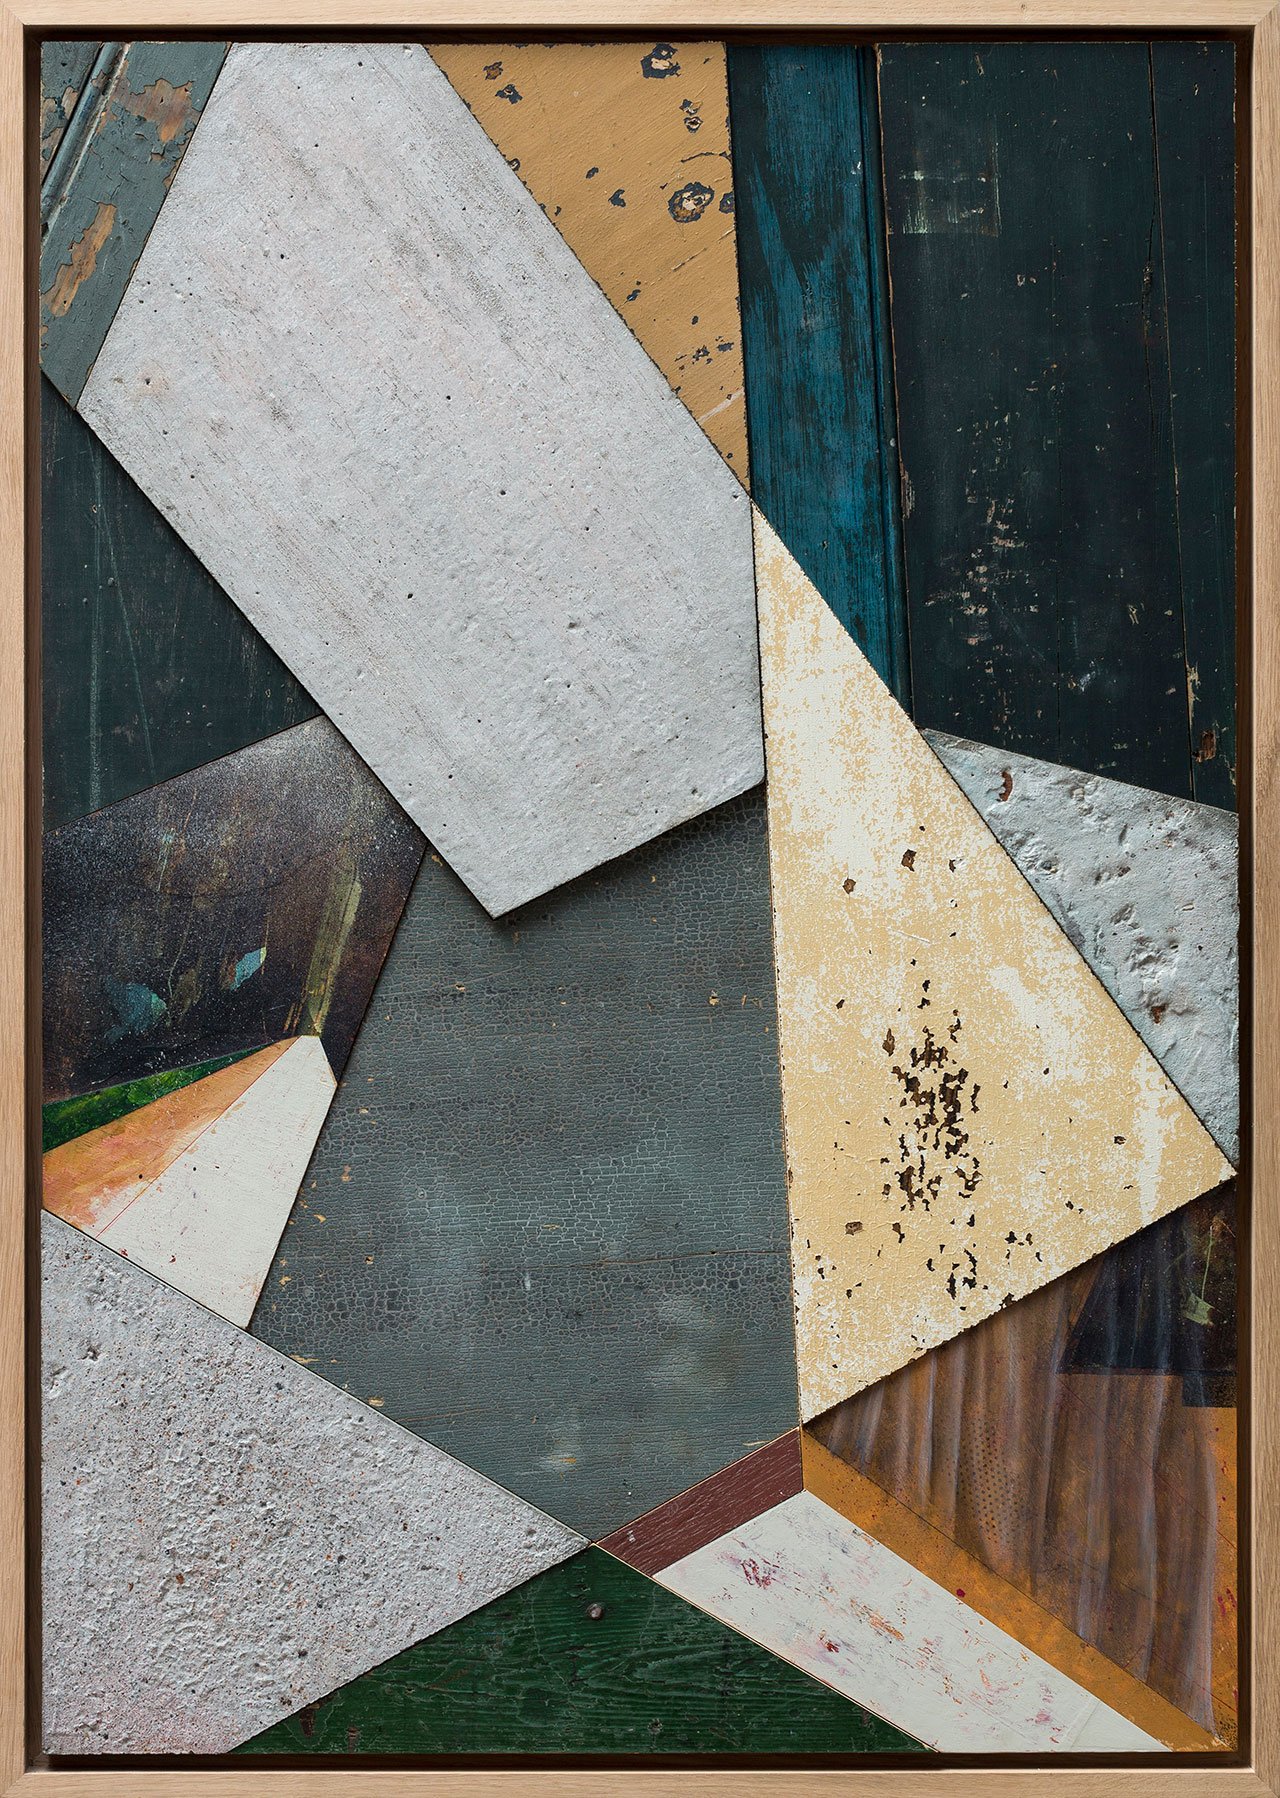 Back to the forest, 2015. Recycled wood, concrete, acrylic and medium on wood panel – Framed, 105 x 75 cm. Photo © Strook.